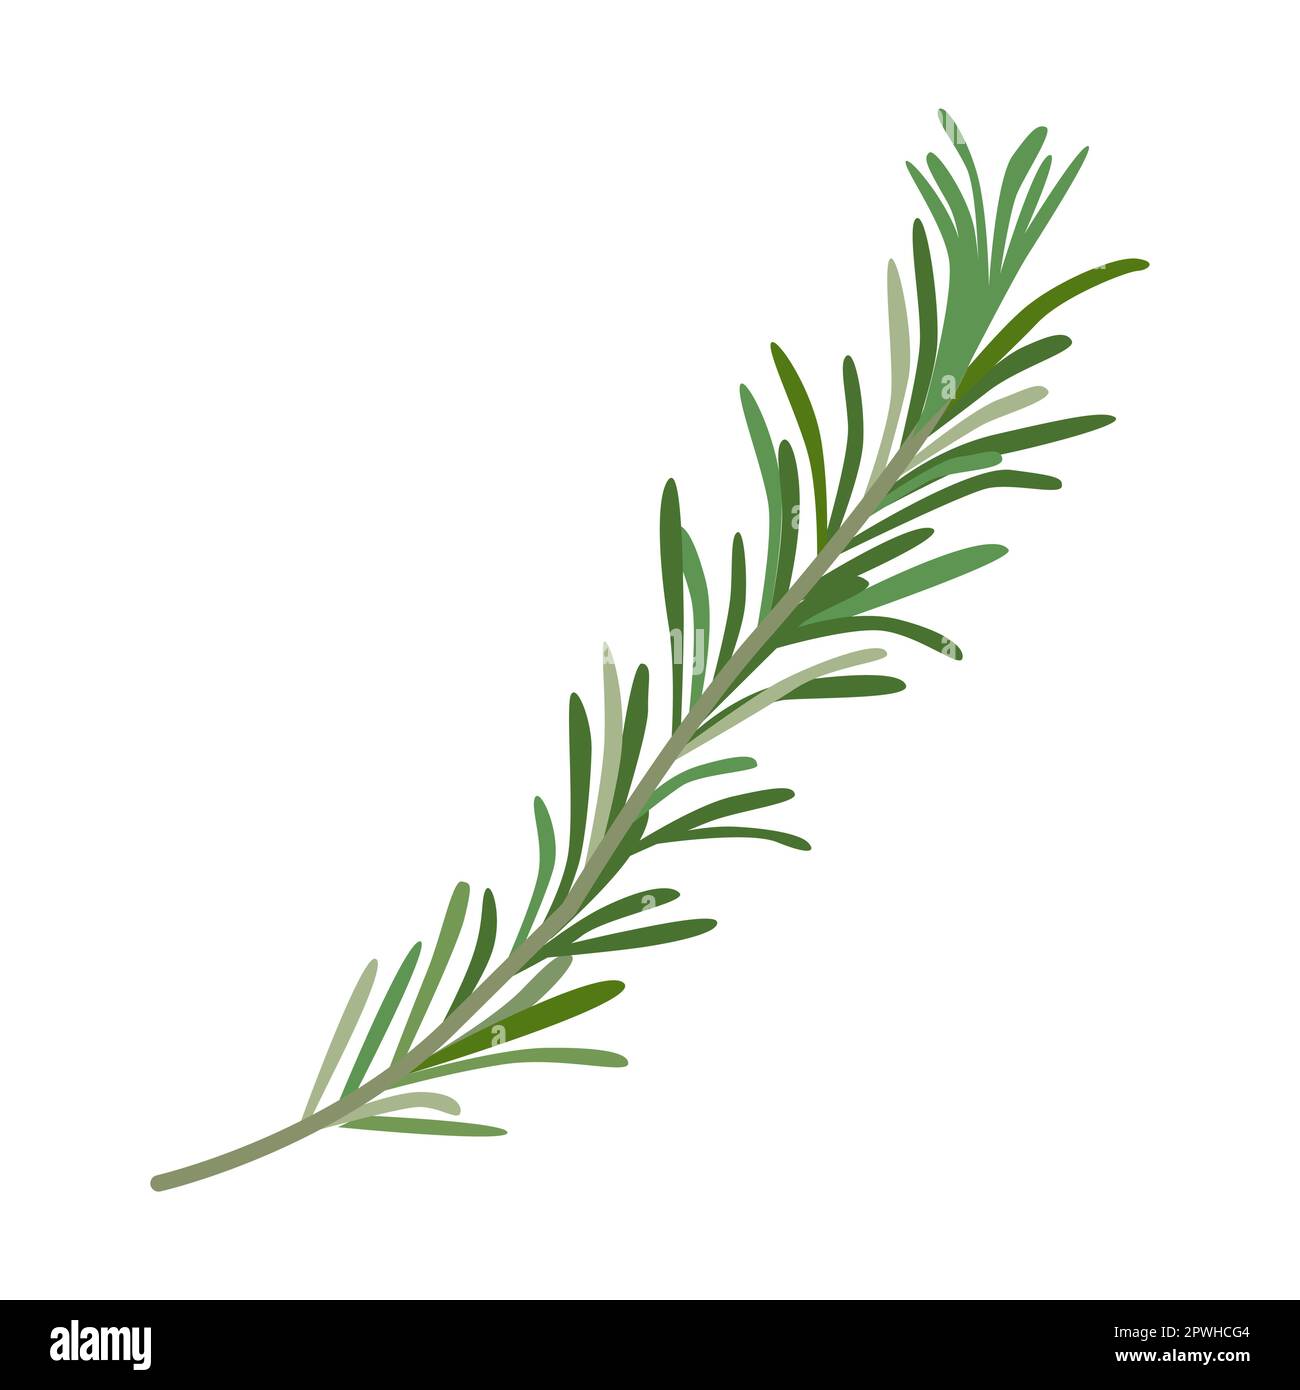 Rosemary herb and leaves vector illustration. Spicy herbal plants, parsley, rosemary, coriander, oregano, mint on white background Stock Vector